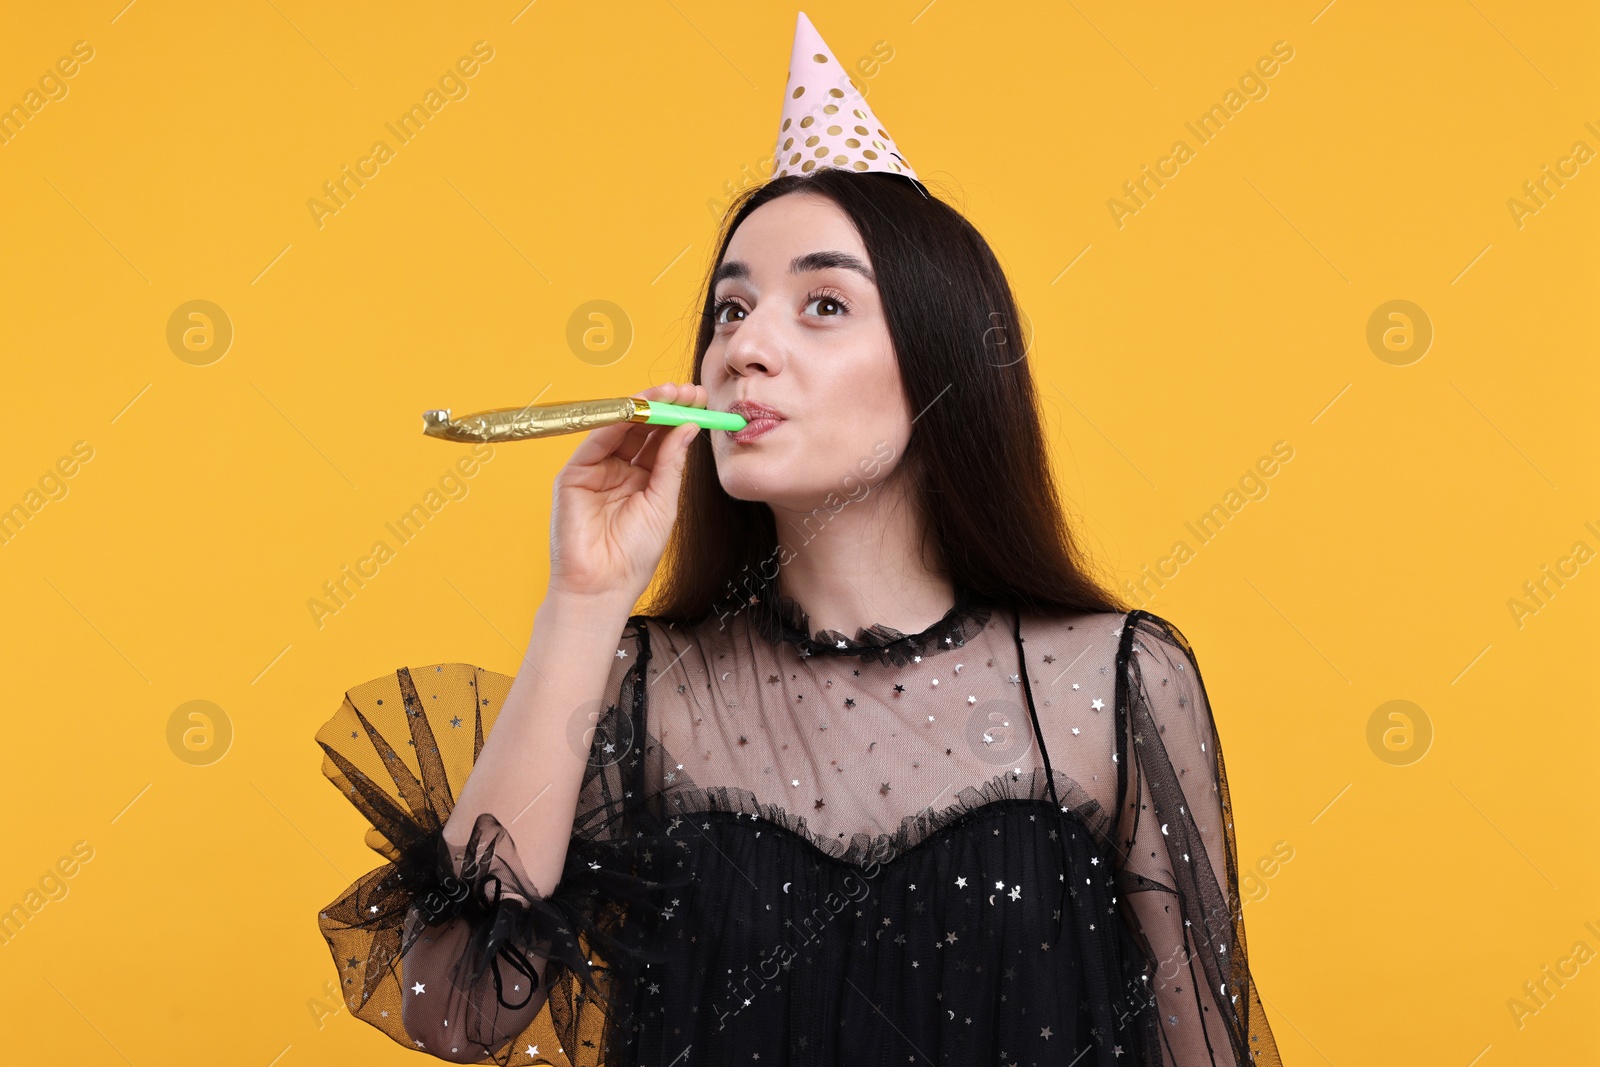 Photo of Woman in party hat with blower on orange background